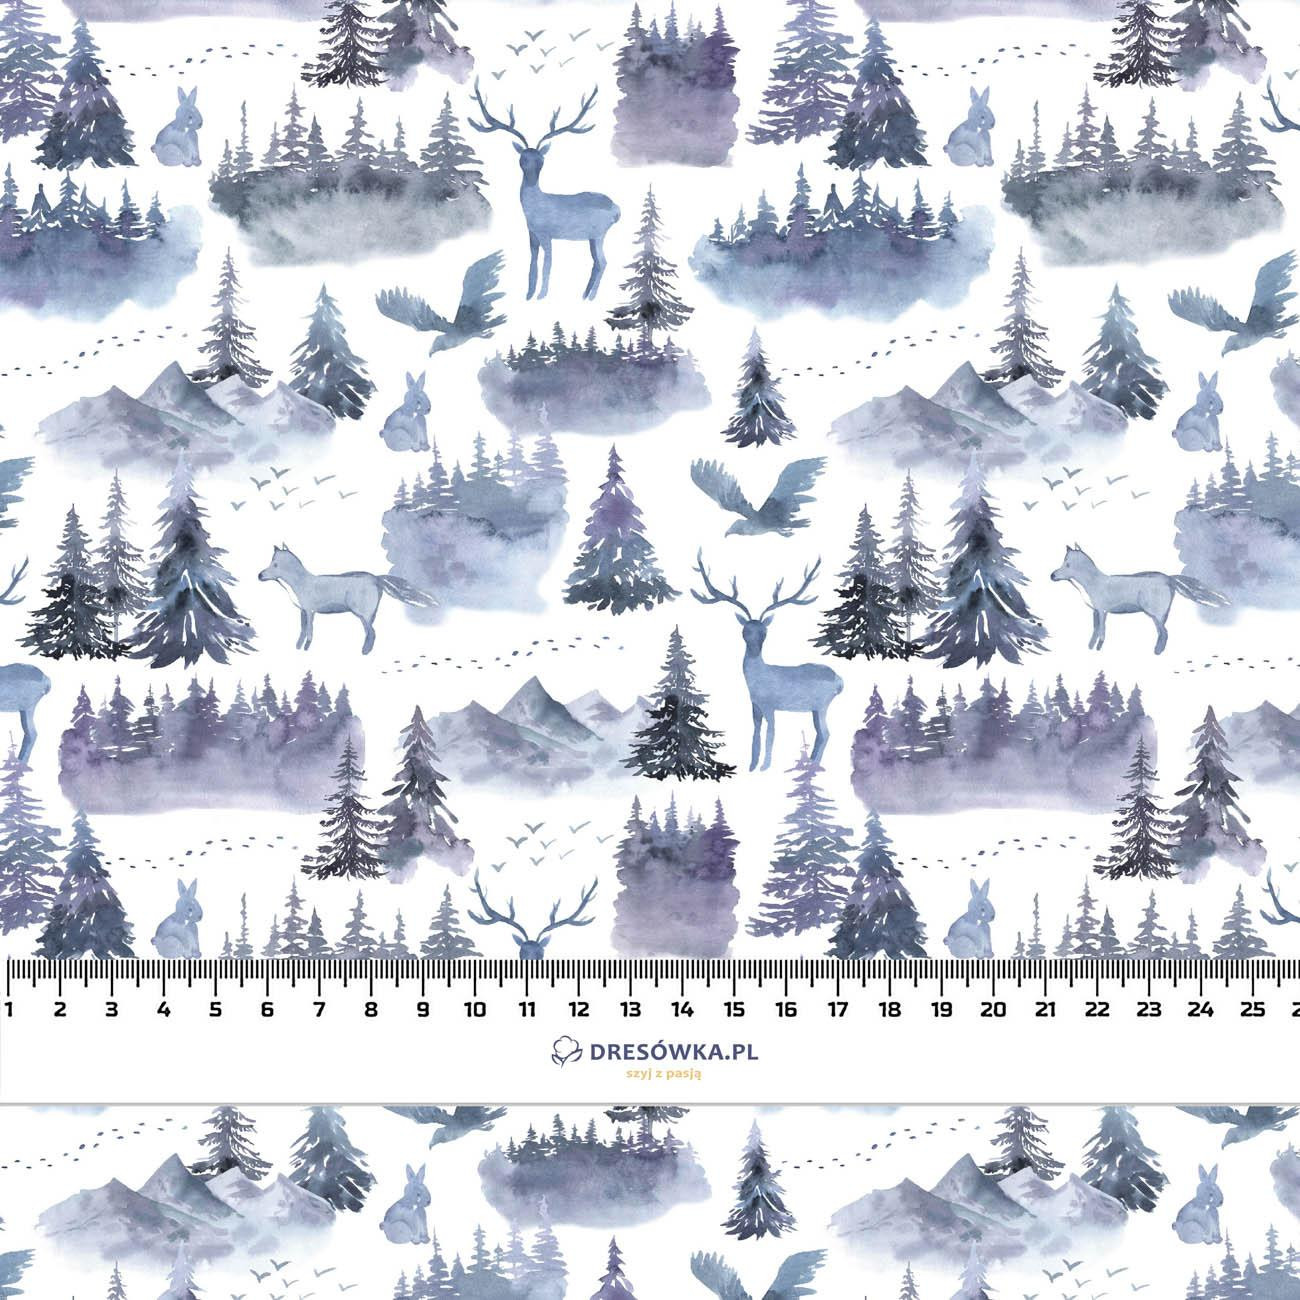 ANIMALS IN THE FOREST (PAINTED FOREST) - Cotton woven fabric